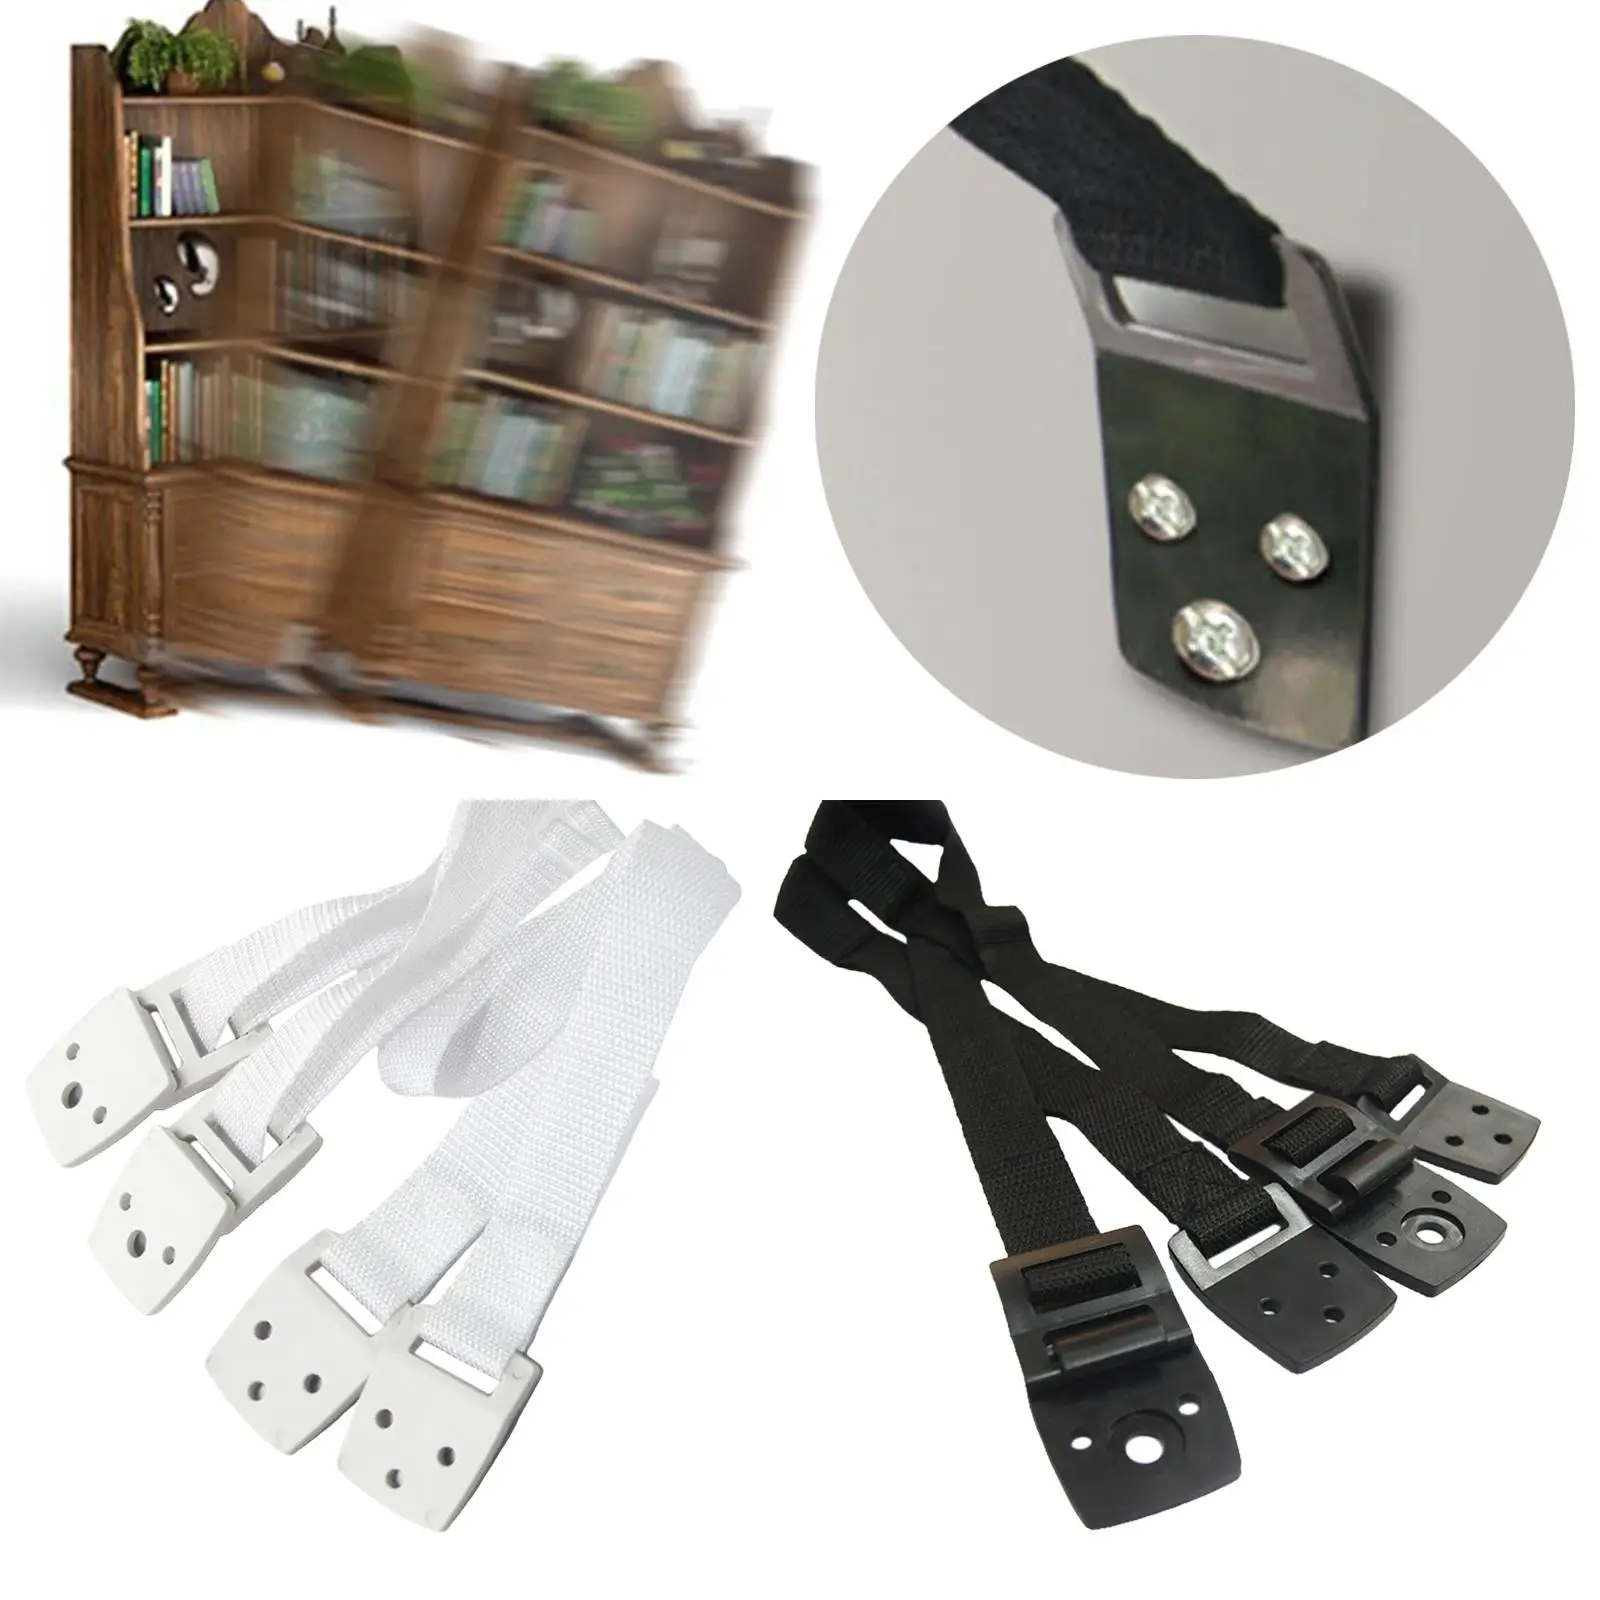 TV Anti Tip Straps,   Plate Non Tipping Safety Strap, Wall Strap for Cabinets Dresser Bookcase Flat  Proofing